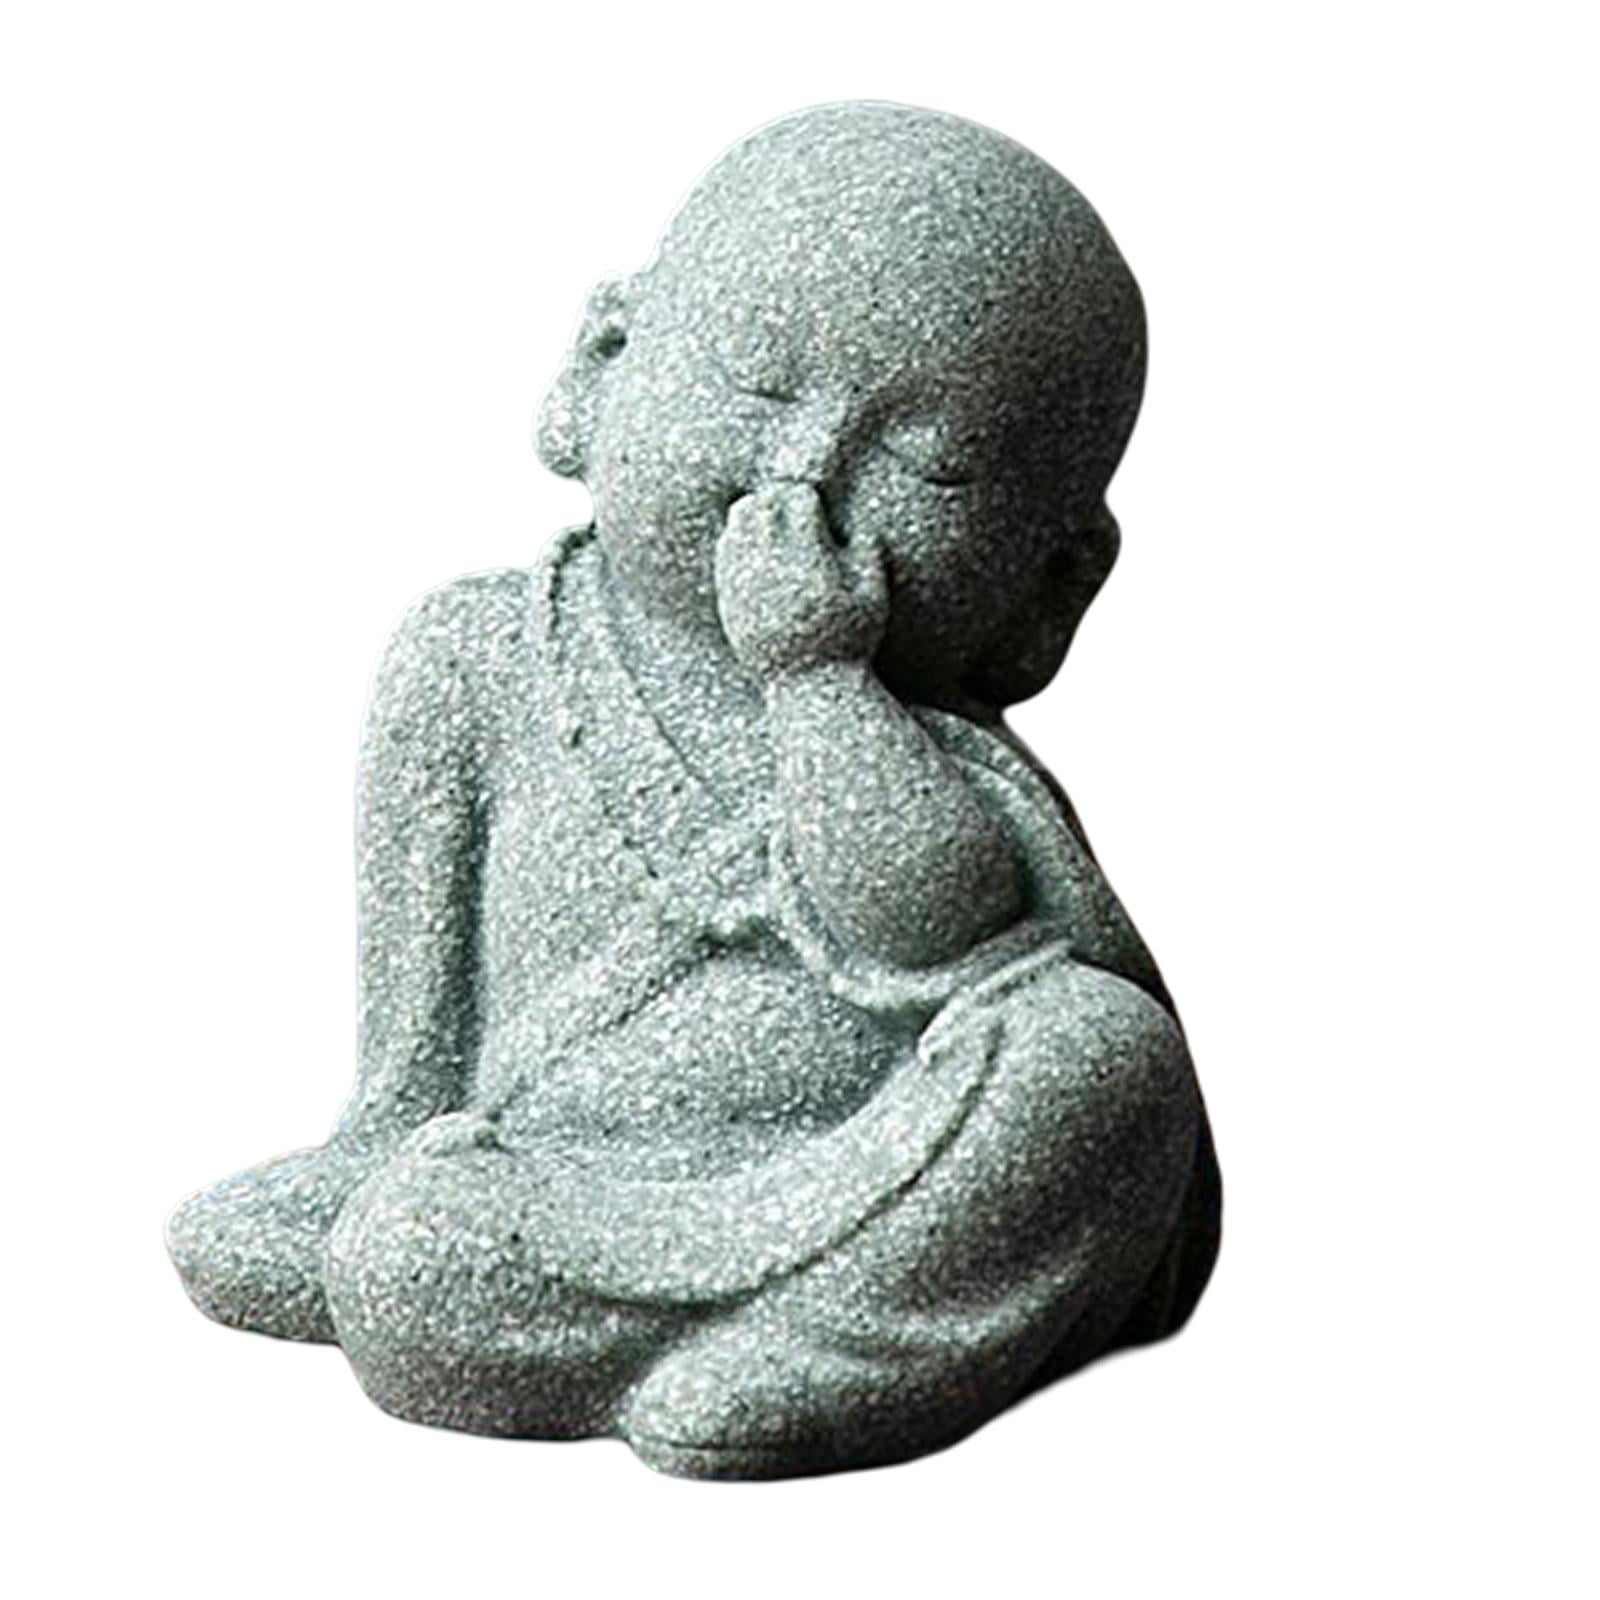 Cute Monk Figurine Buddha Statue Dolls Ornaments Creative Decorative  Miniature Handmade for Decoration Meditating Indoor Office Outdoor Cover  Eyes